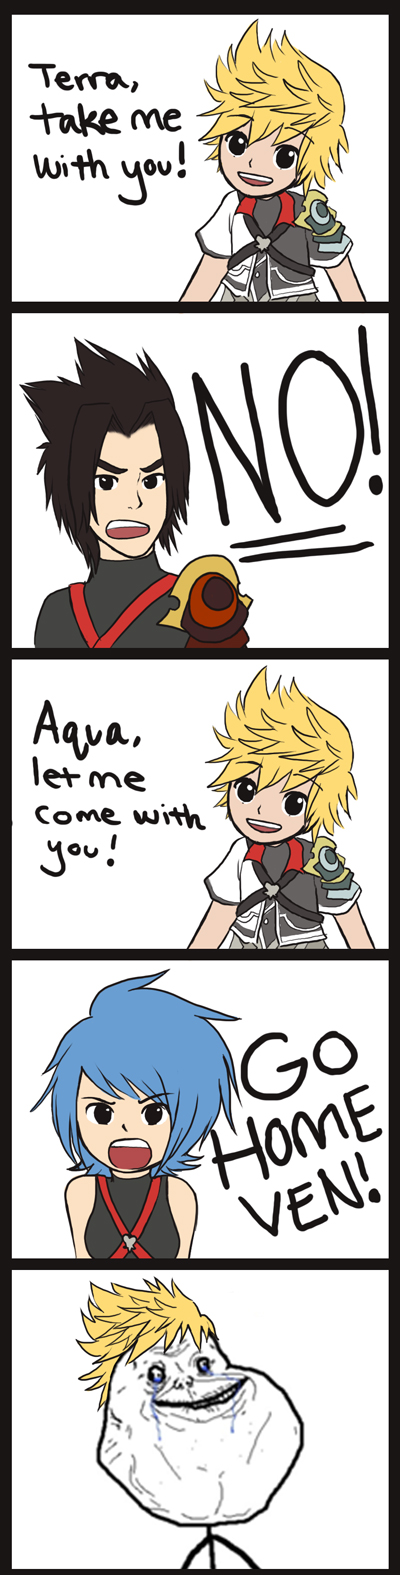 ventus_forever_alone_by_chocowaffle-d33byw8.jpg